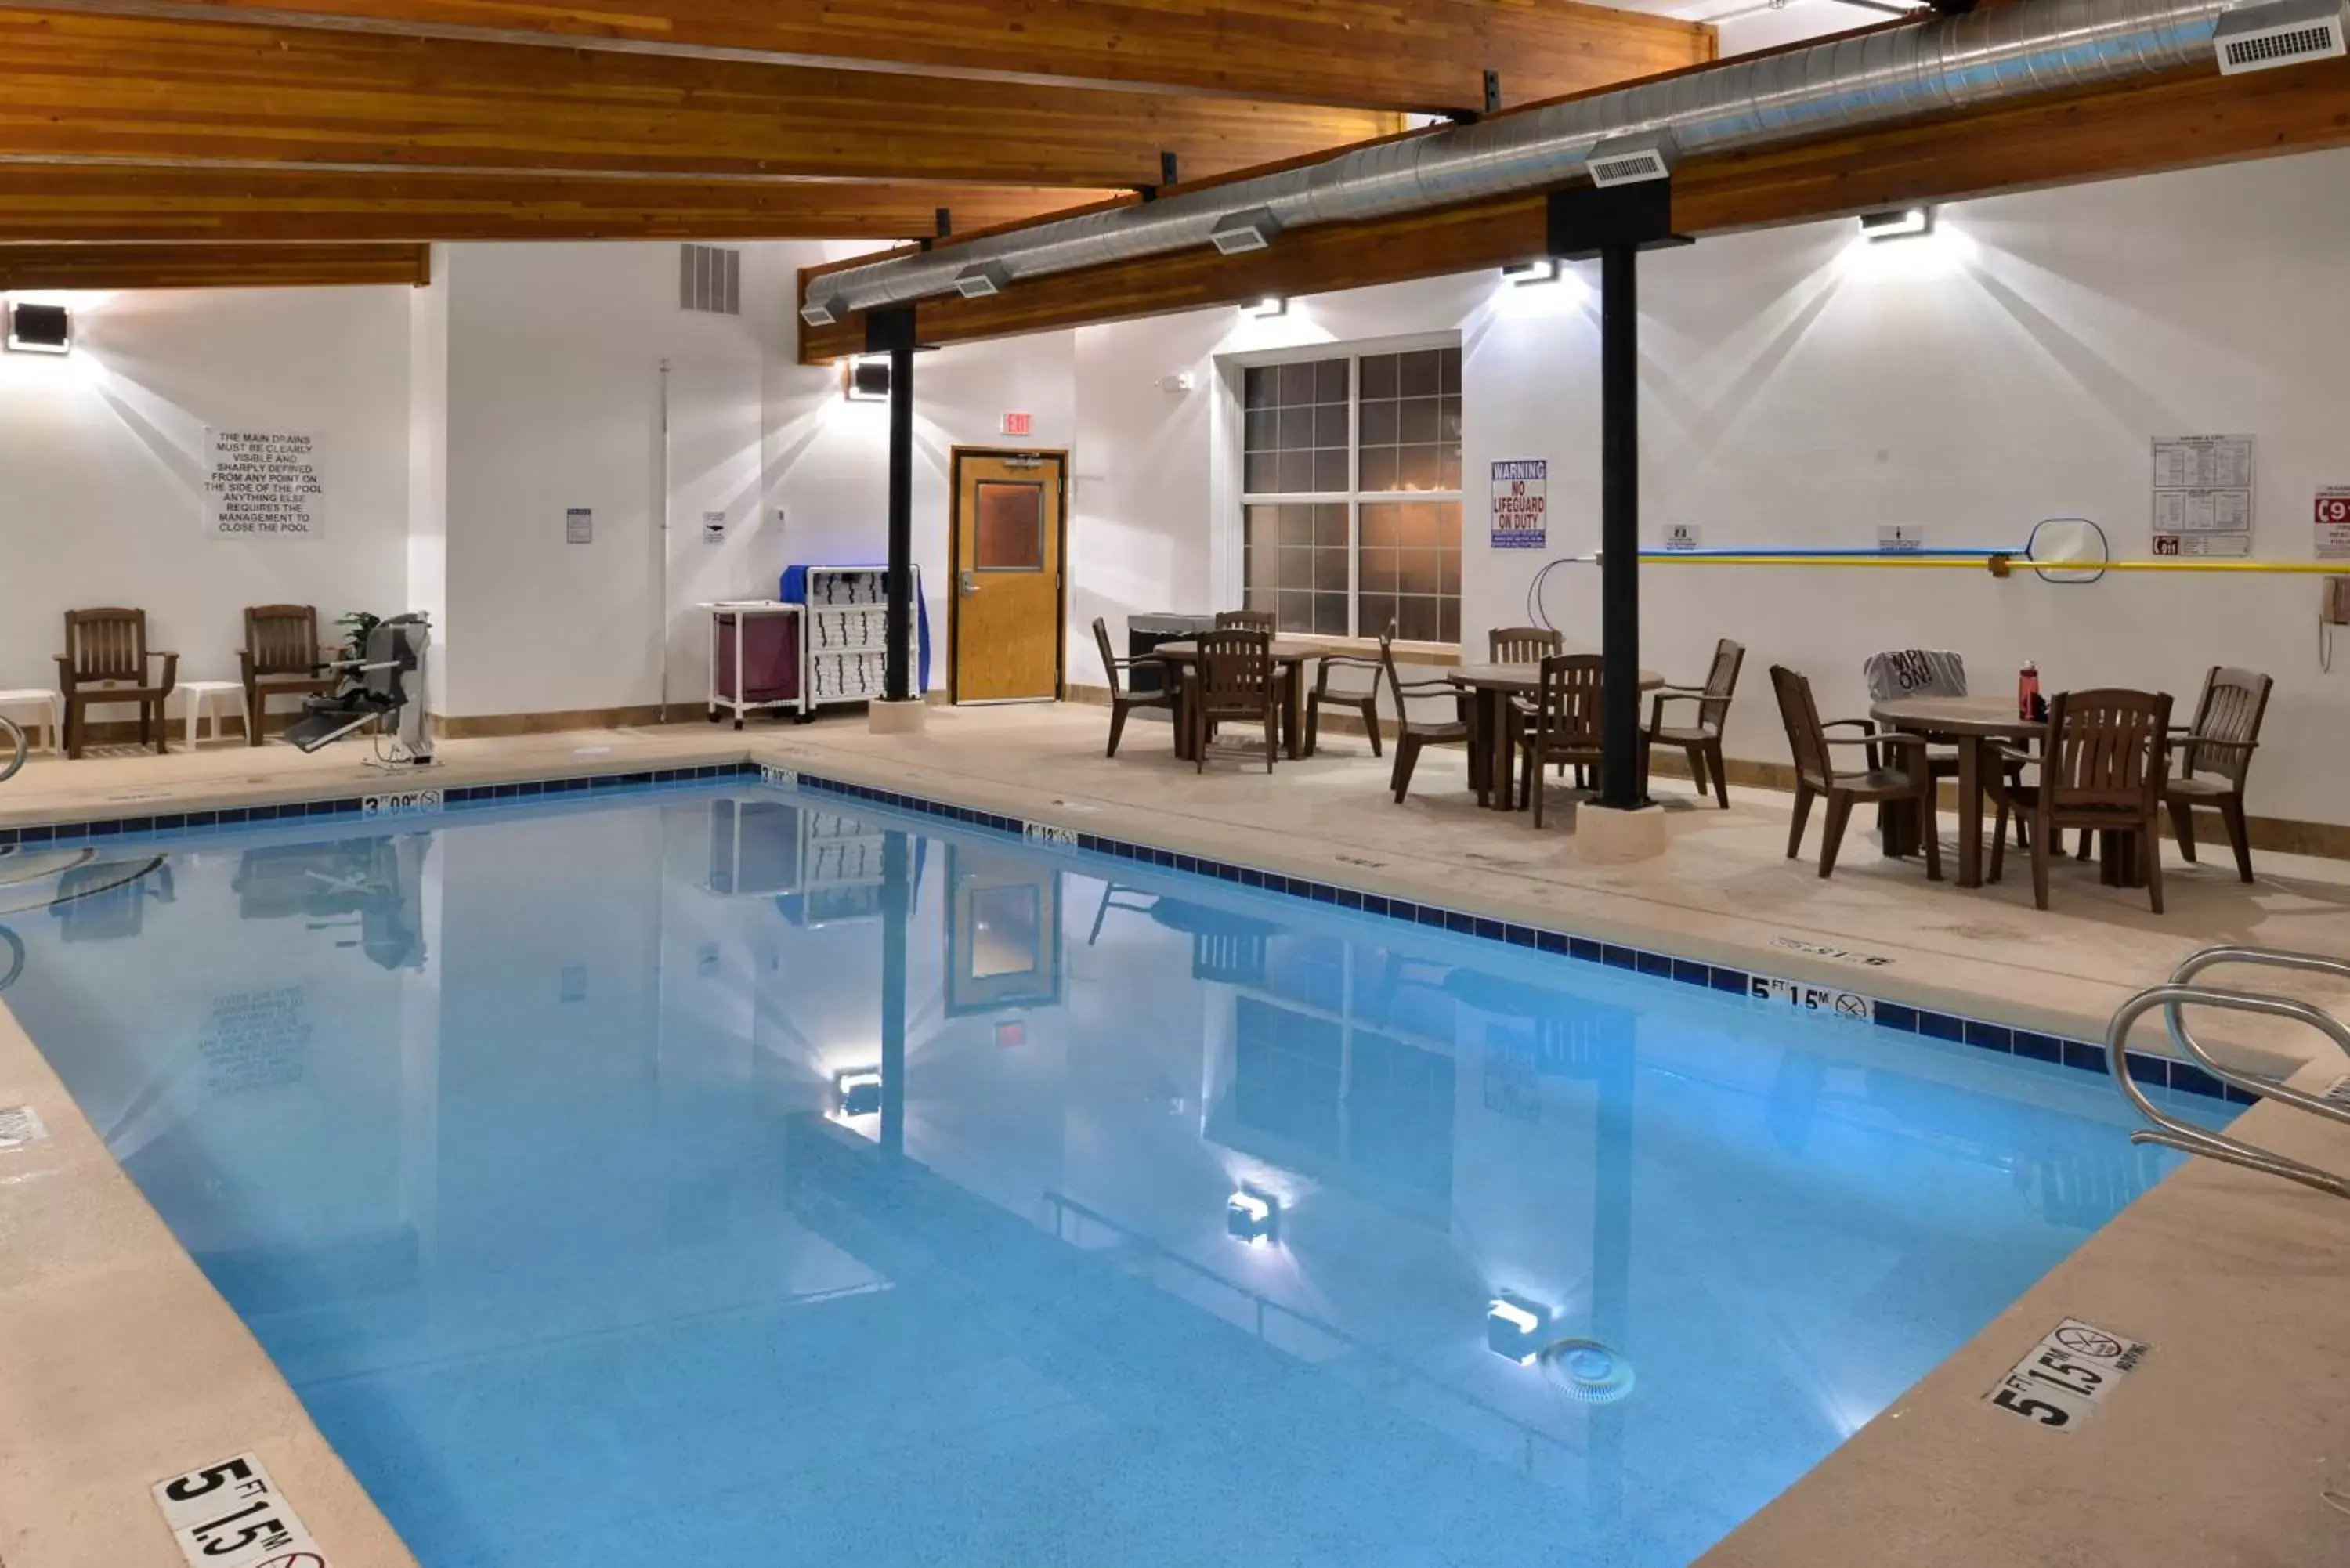 Swimming Pool in Stage Coach Inn